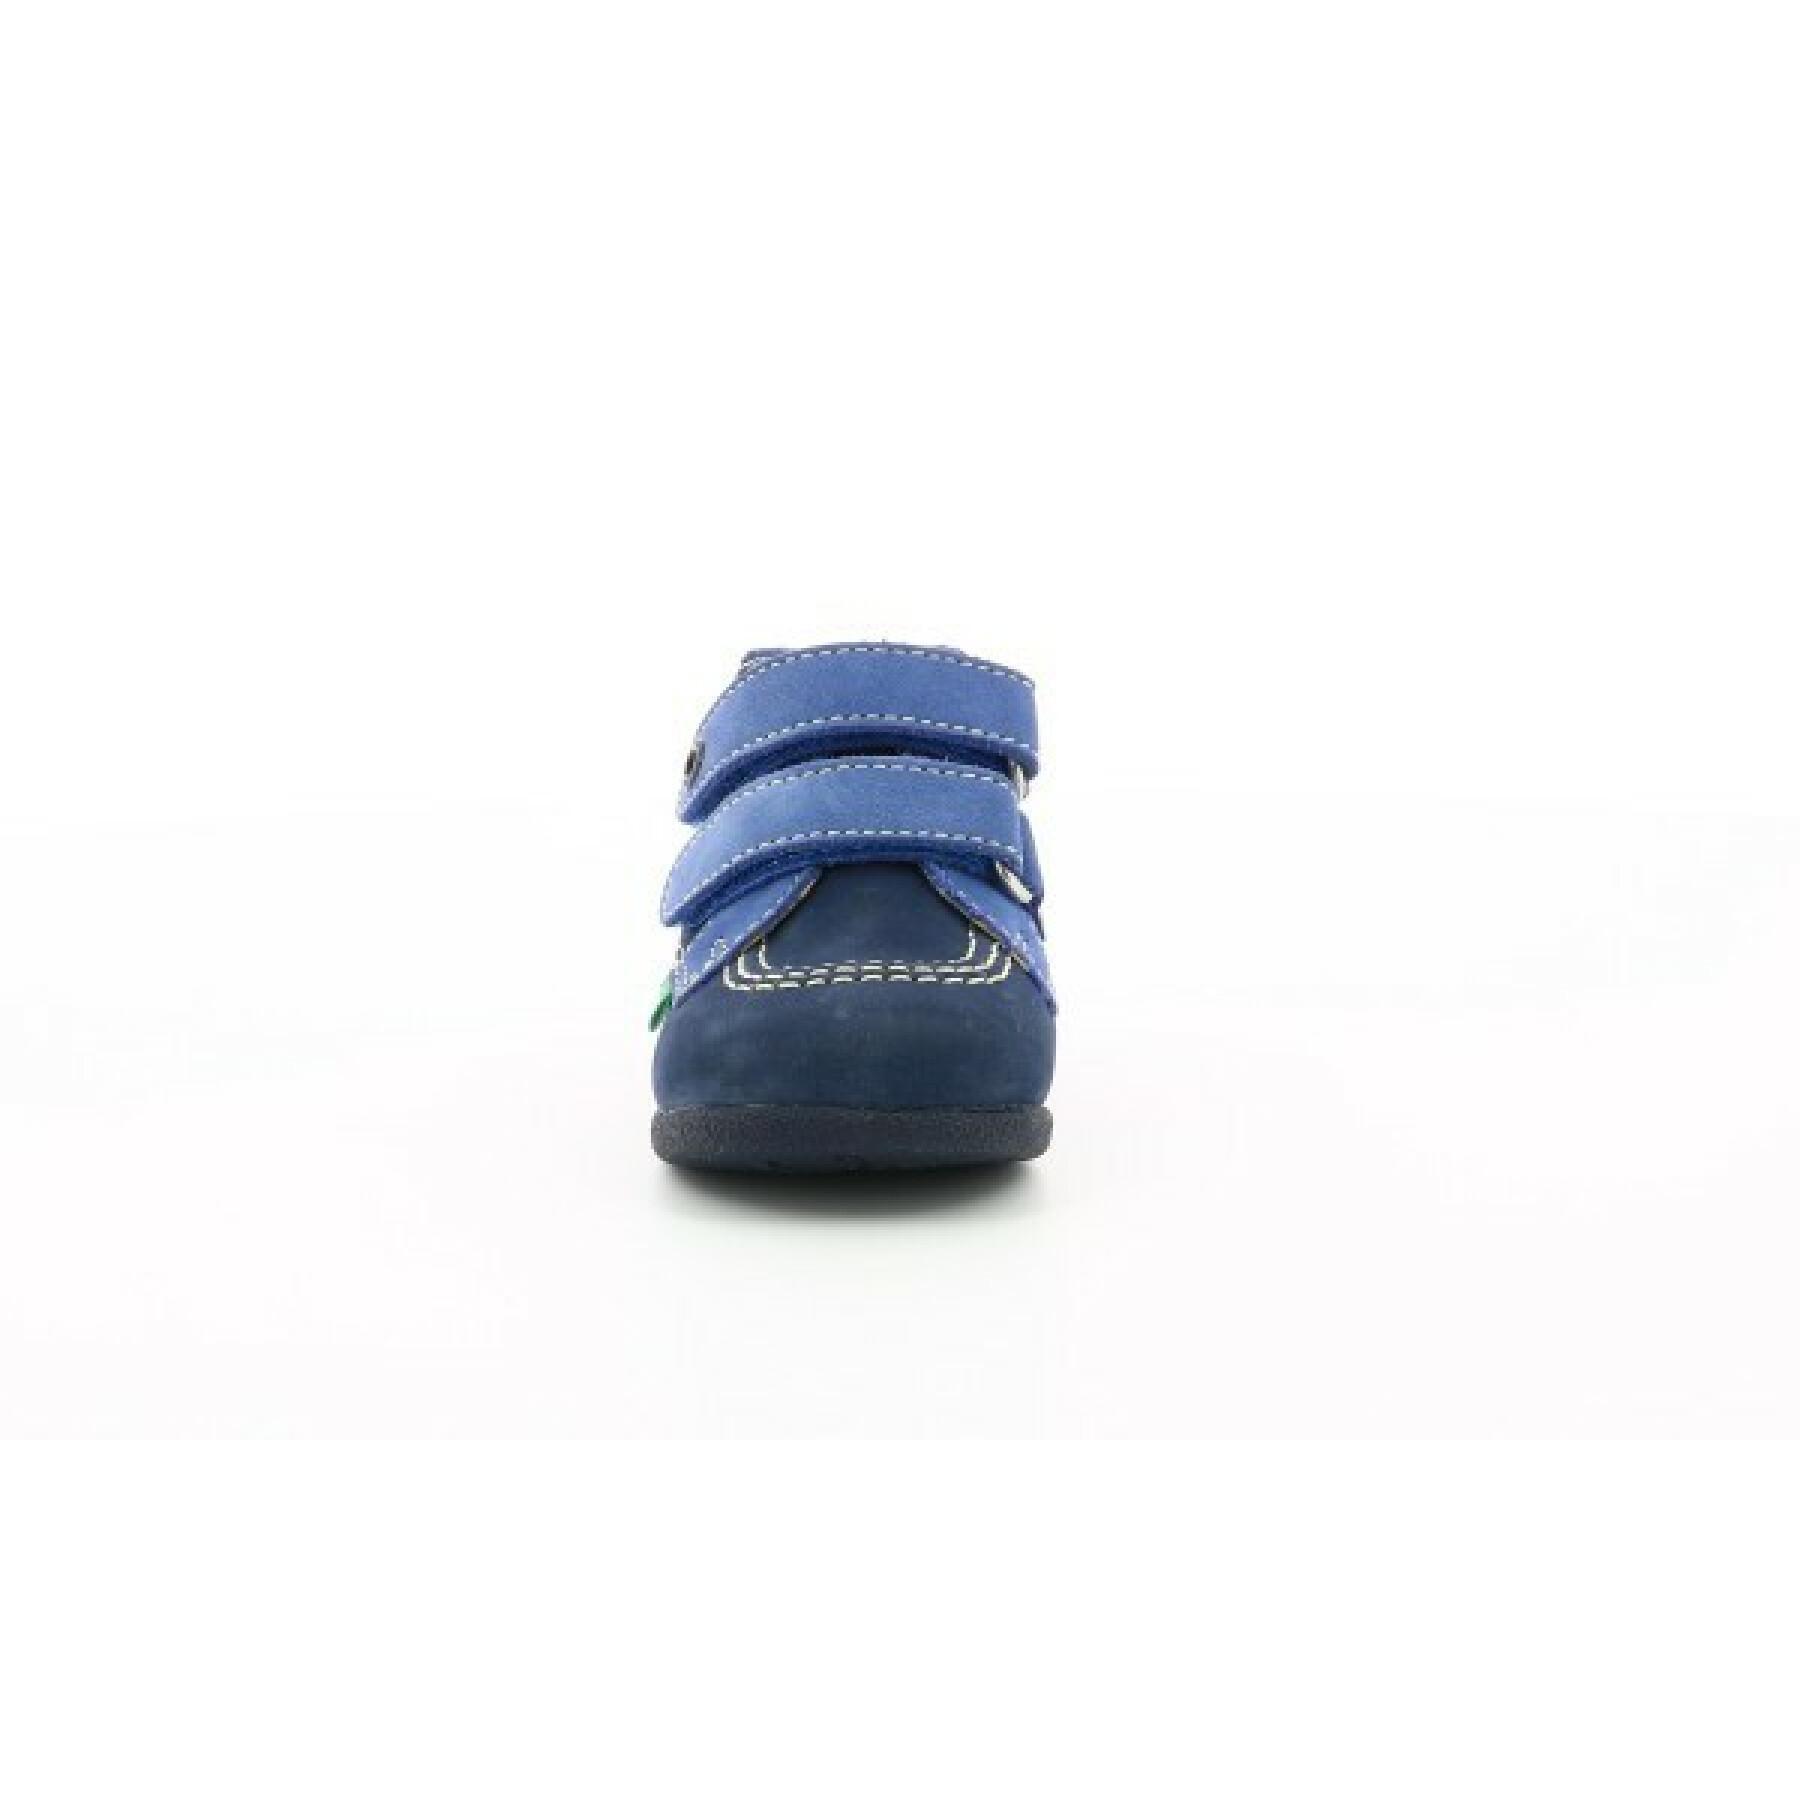 Baby boots Kickers babyscratch